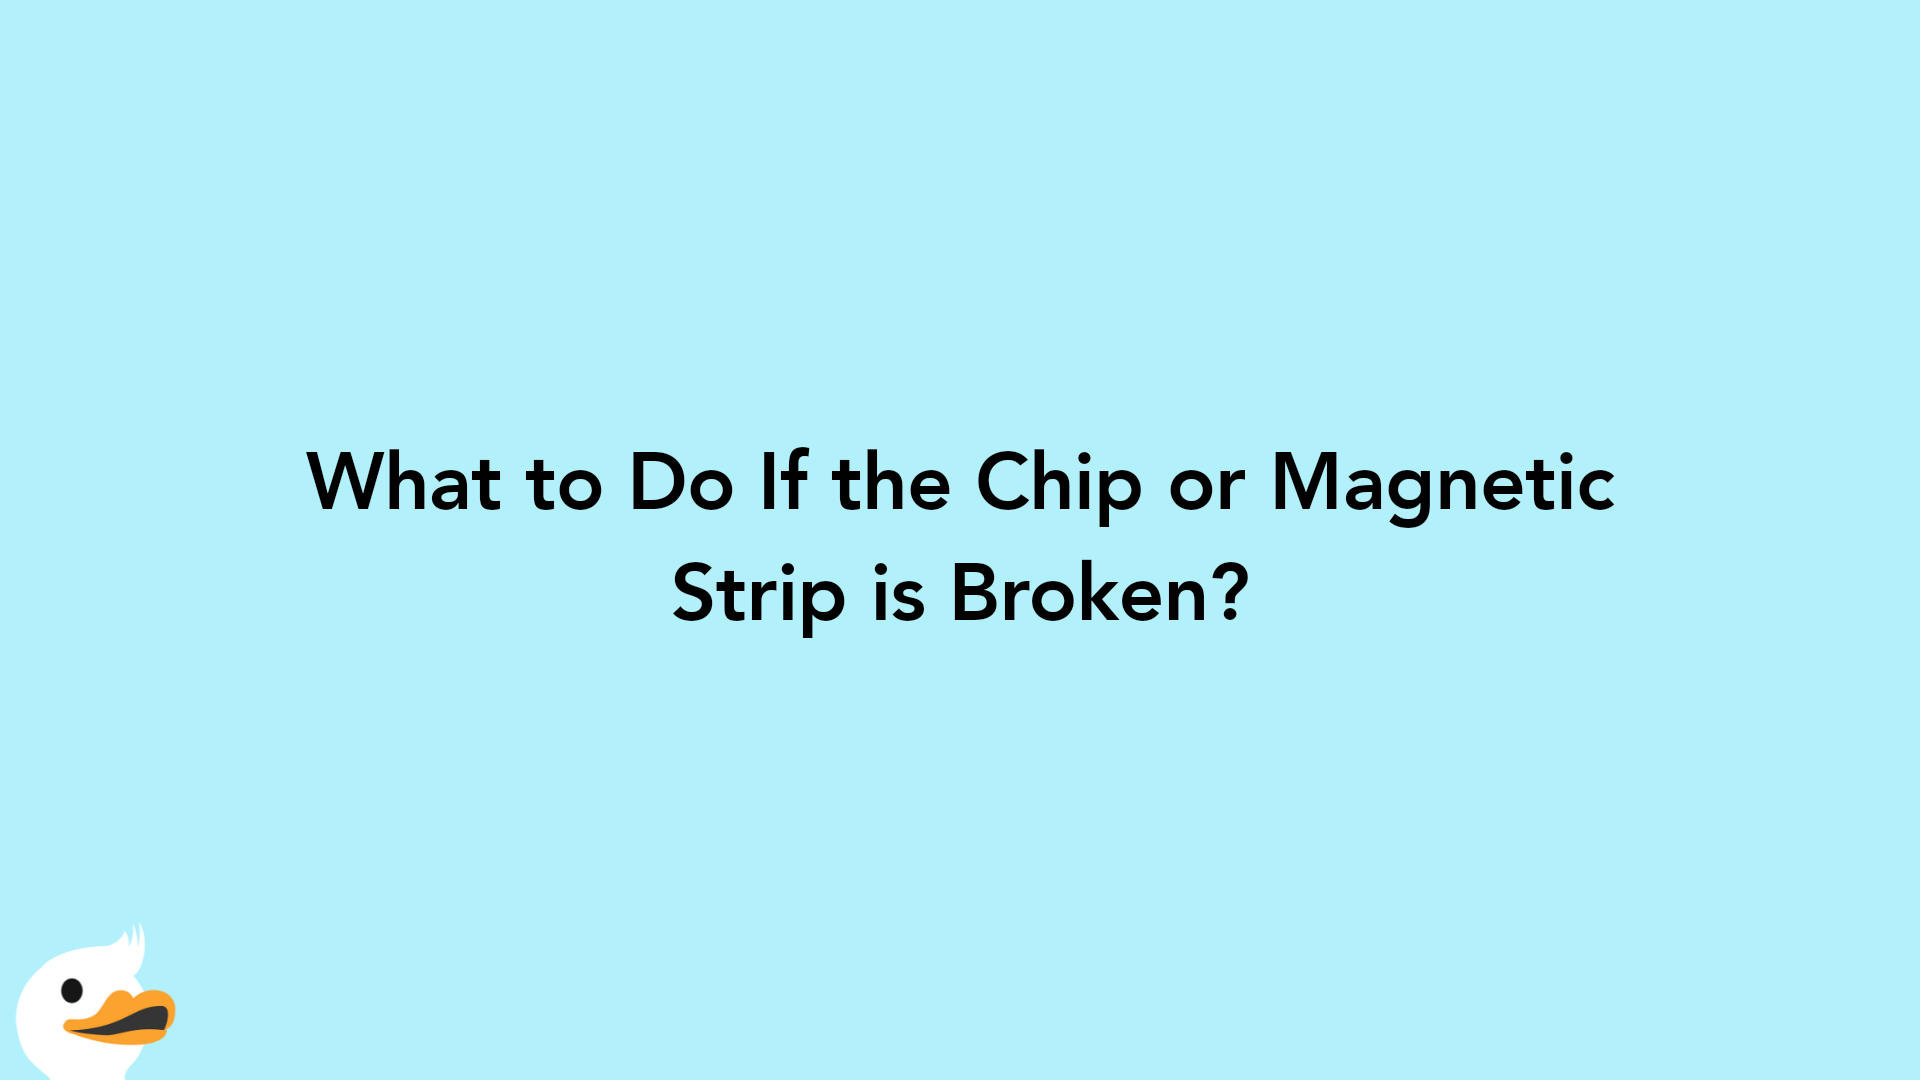 What to Do If the Chip or Magnetic Strip is Broken?